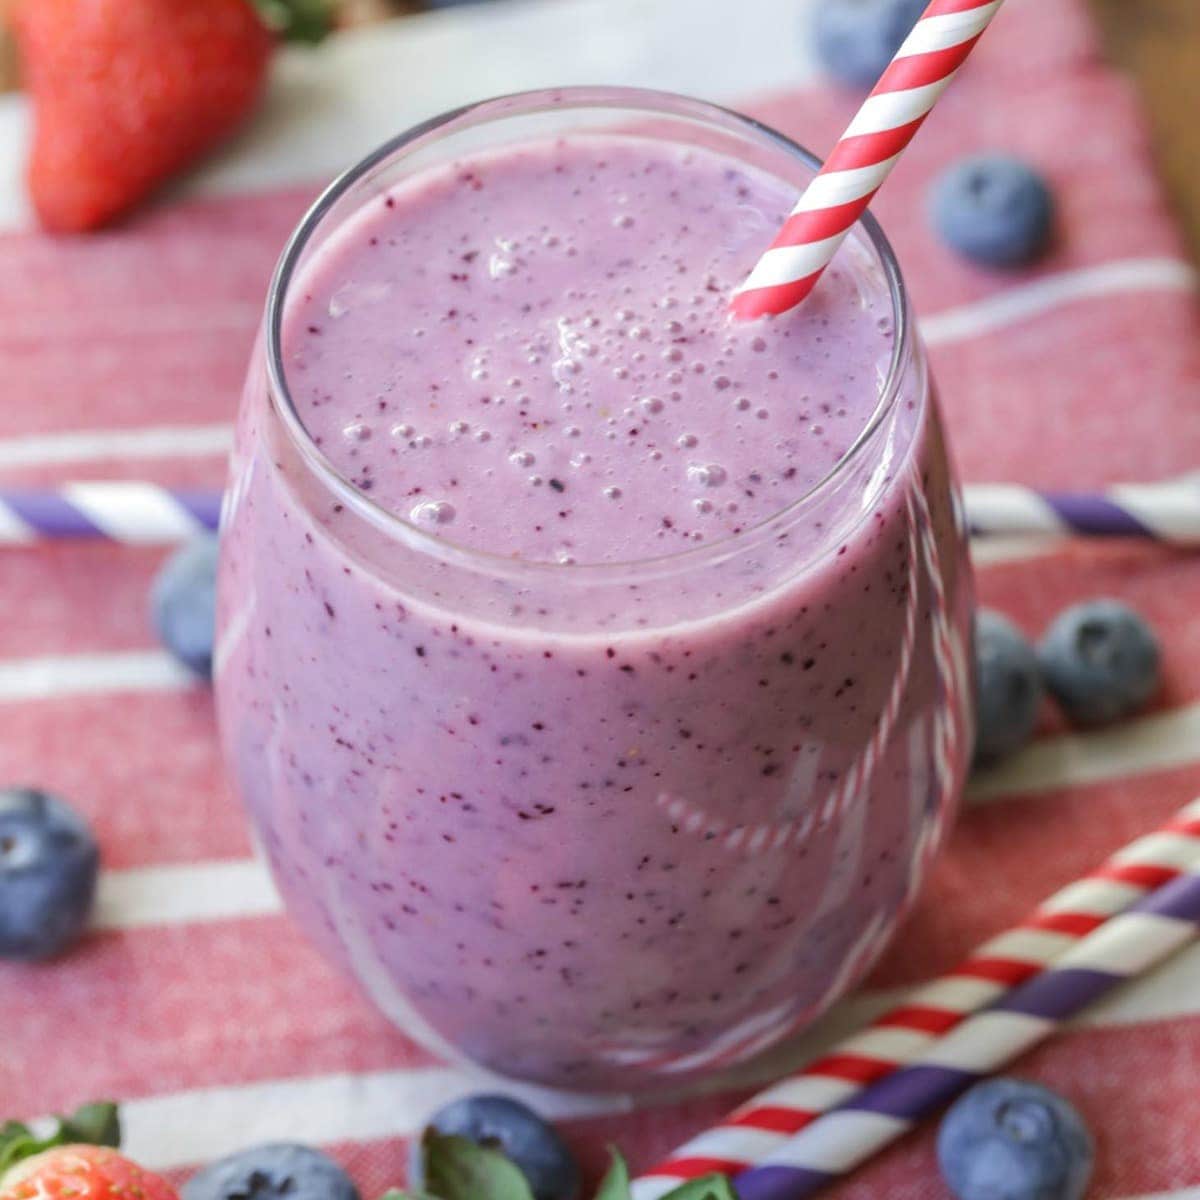 Strawberry Blueberry Smoothies served in a glass with a red and white straw.